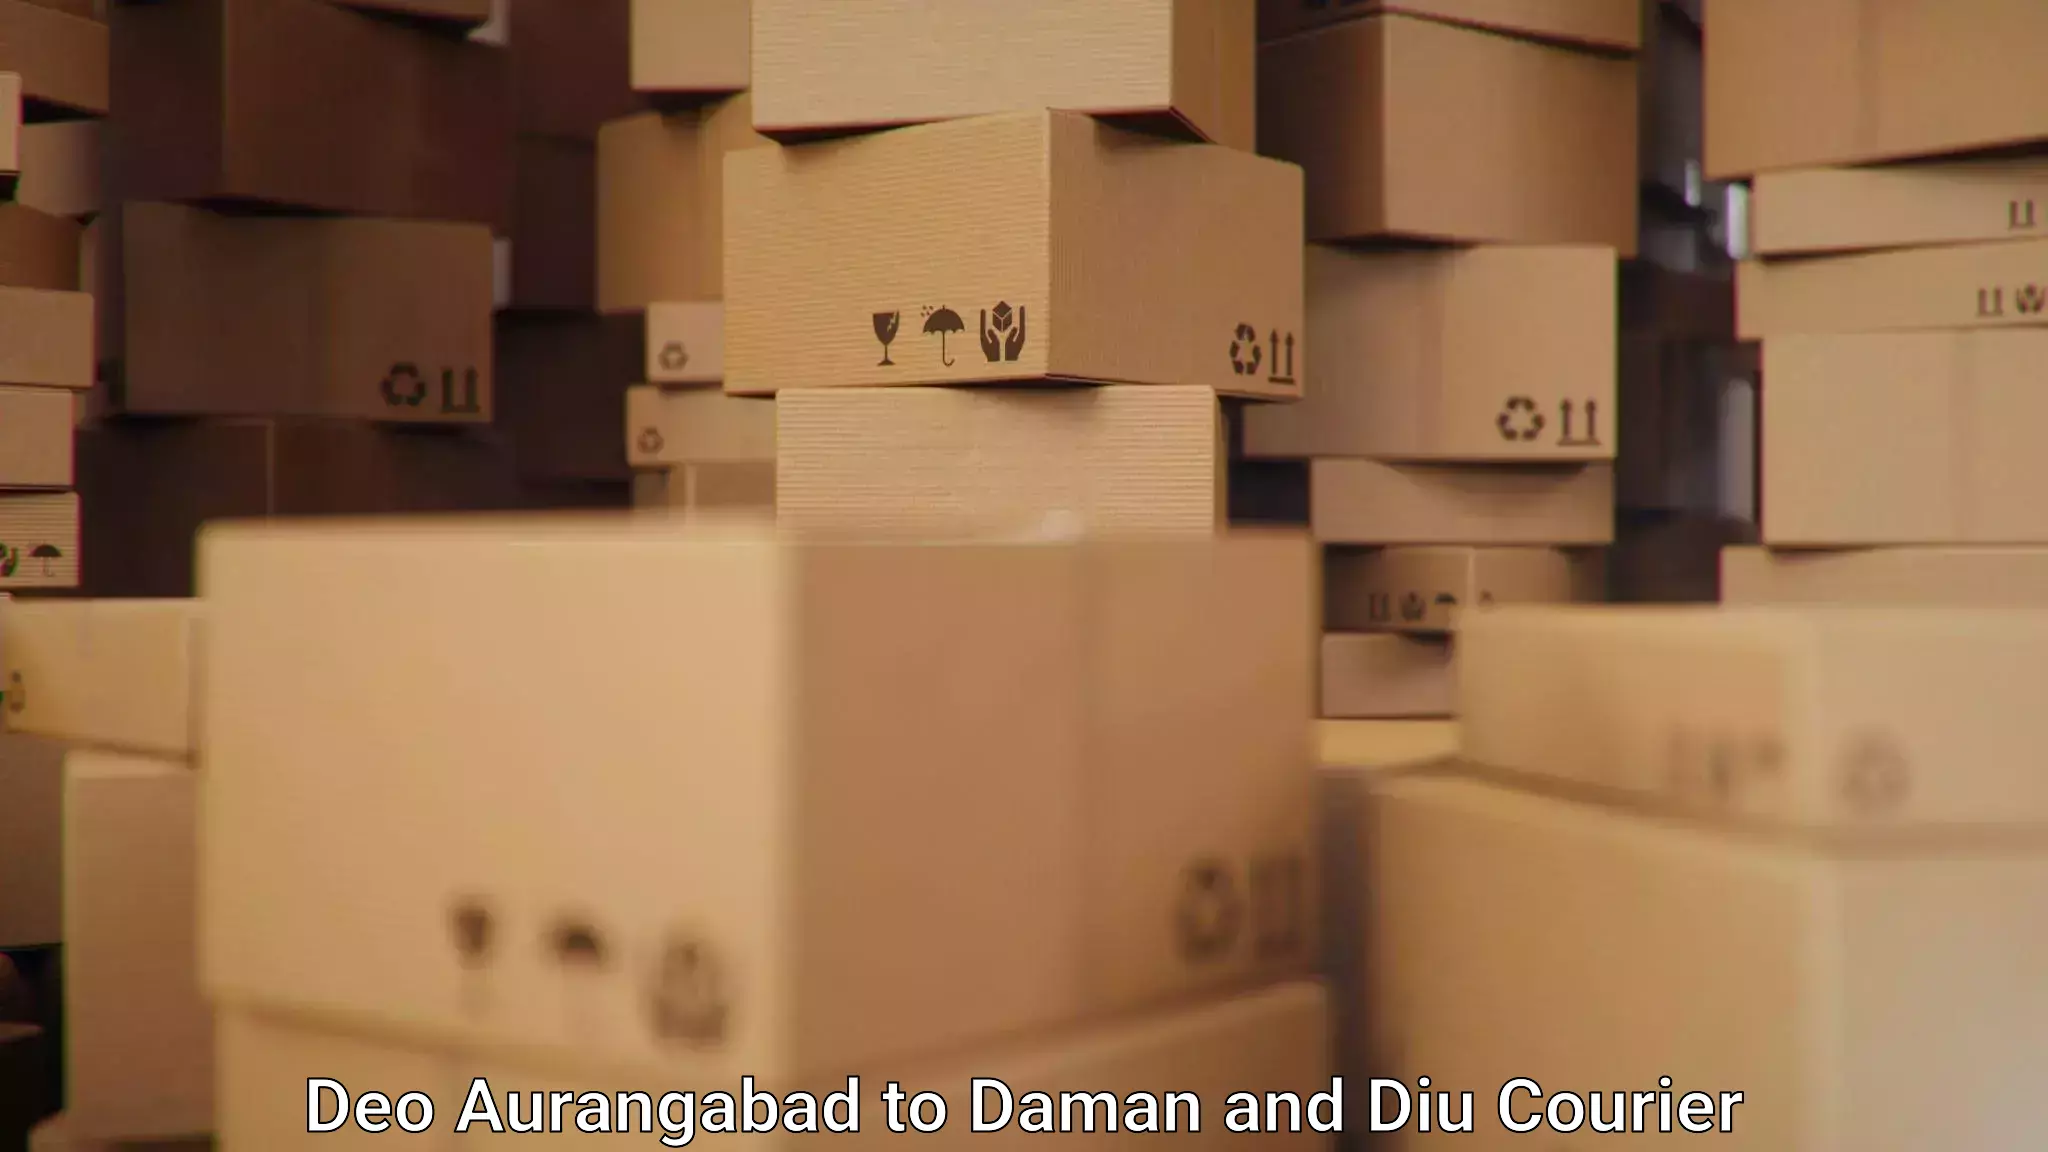 Parcel handling and care in Deo Aurangabad to Daman and Diu